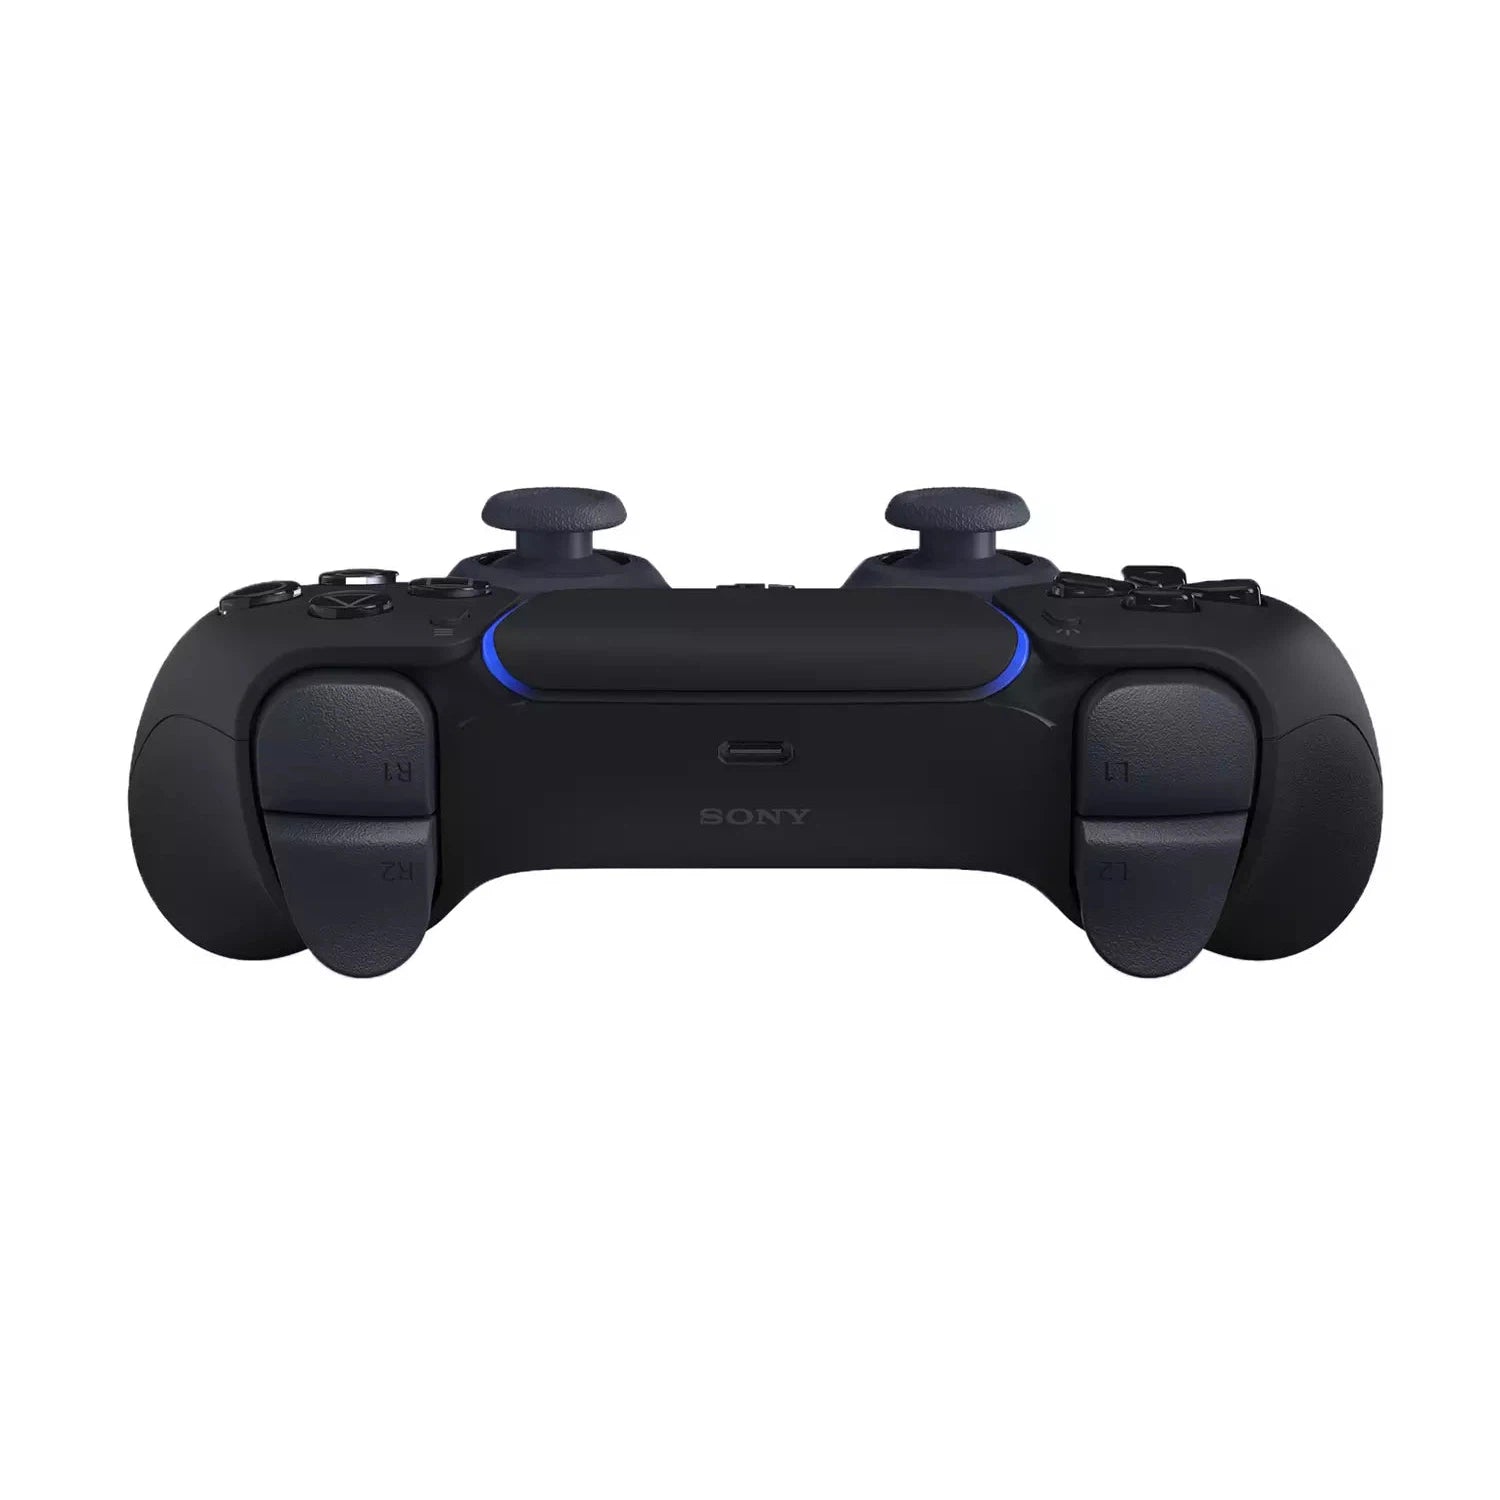 Sony PS5 DualSense Wireless Controller - Black - Refurbished Excellent